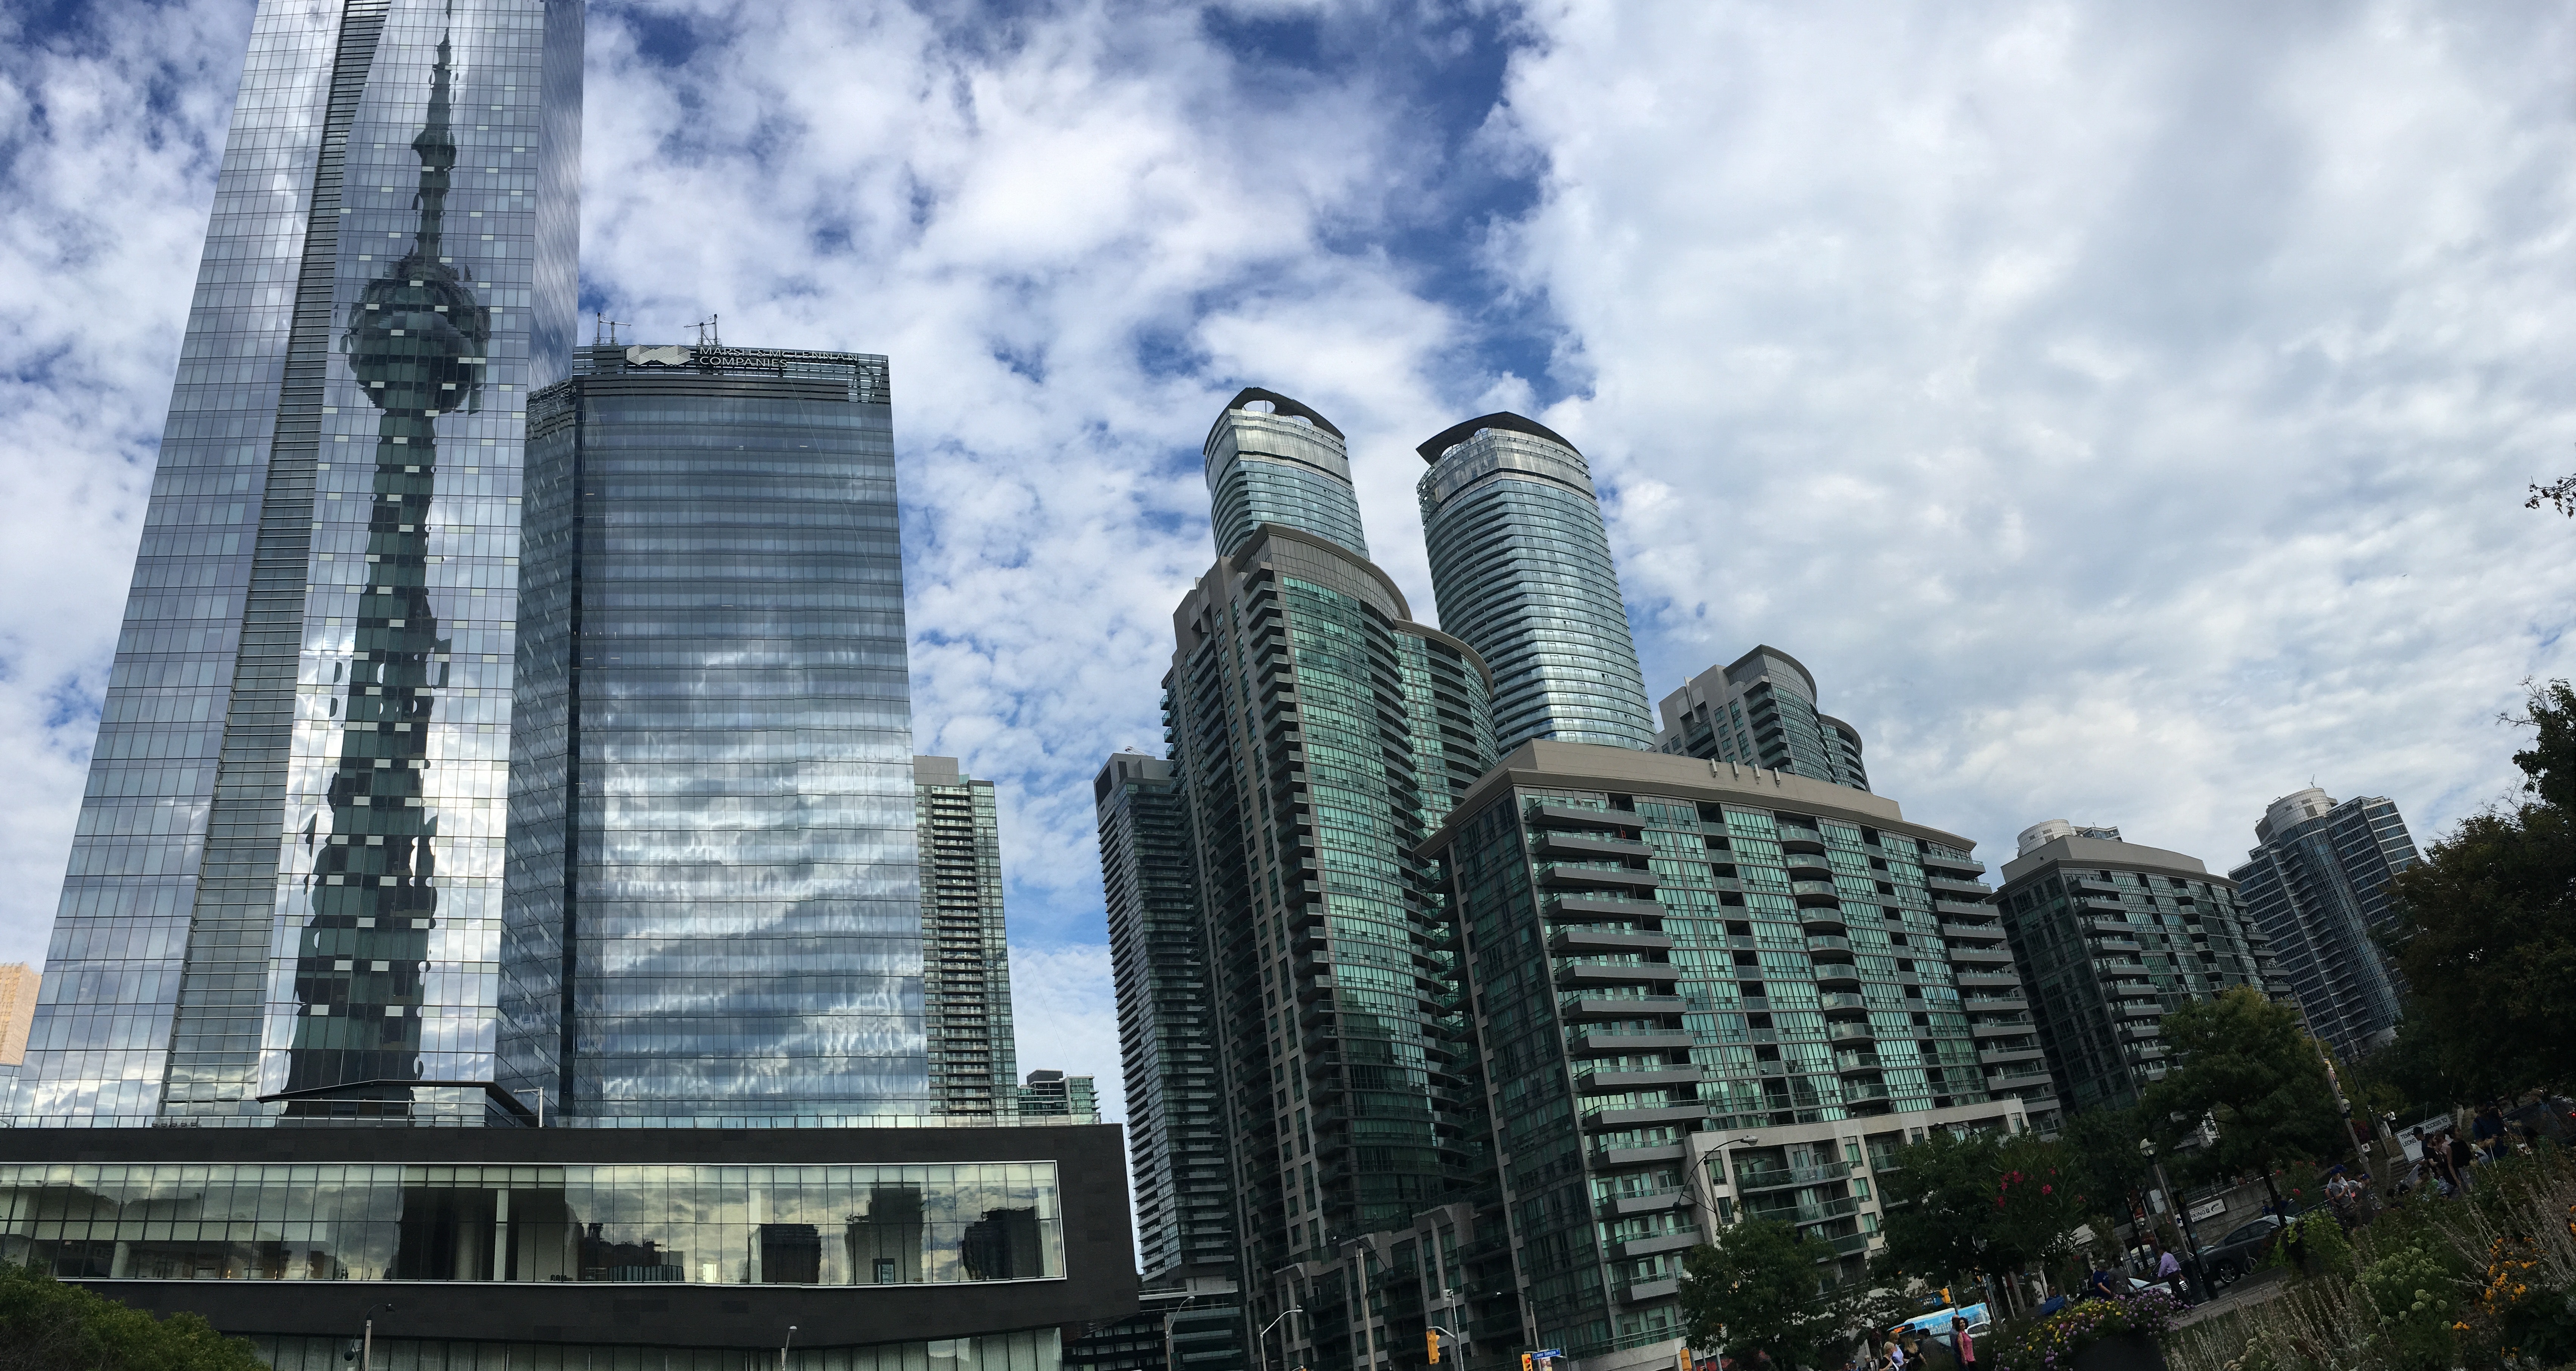 Low Angle View of Skyscrapers Against Cloudy Sky, Architecture, Buildings, Canada, City, HQ Photo